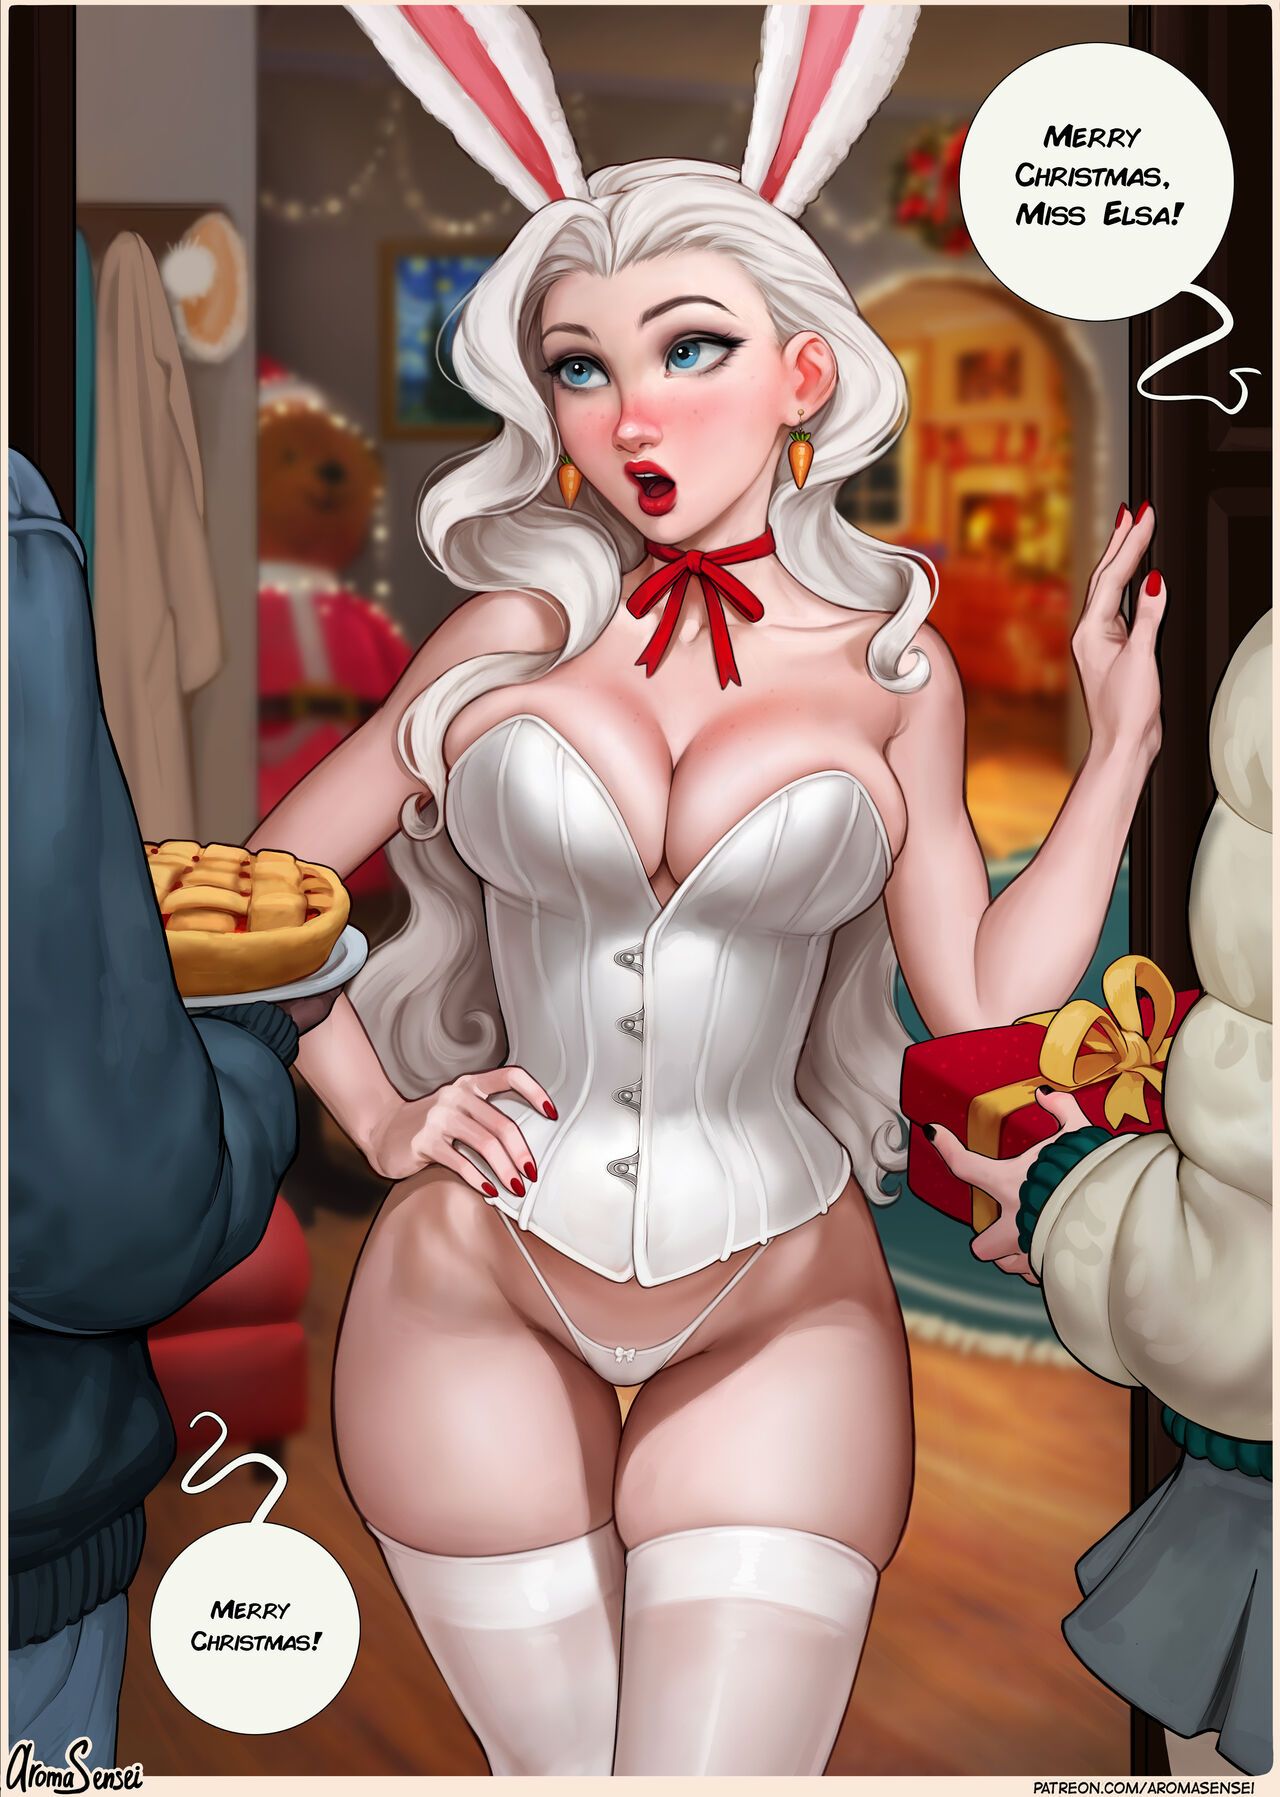 Frozen Inc Christmas Party of 2022 Porn Comic english 05